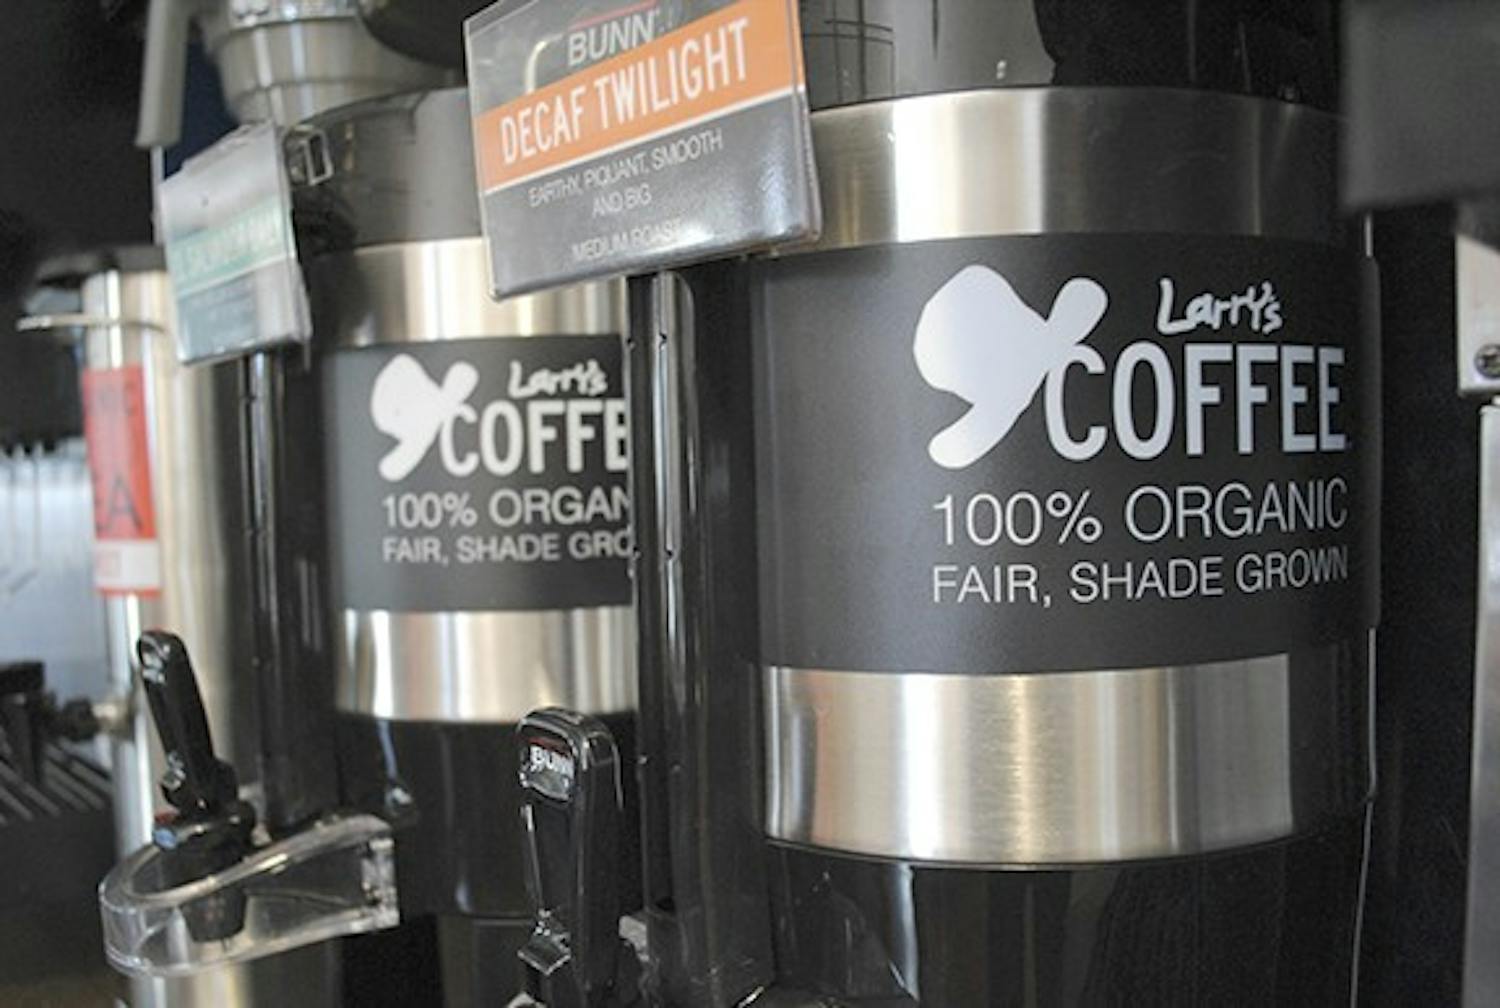 Larry's Coffee, which is 100% organic, is now served in Lenoir Dining Hall. 